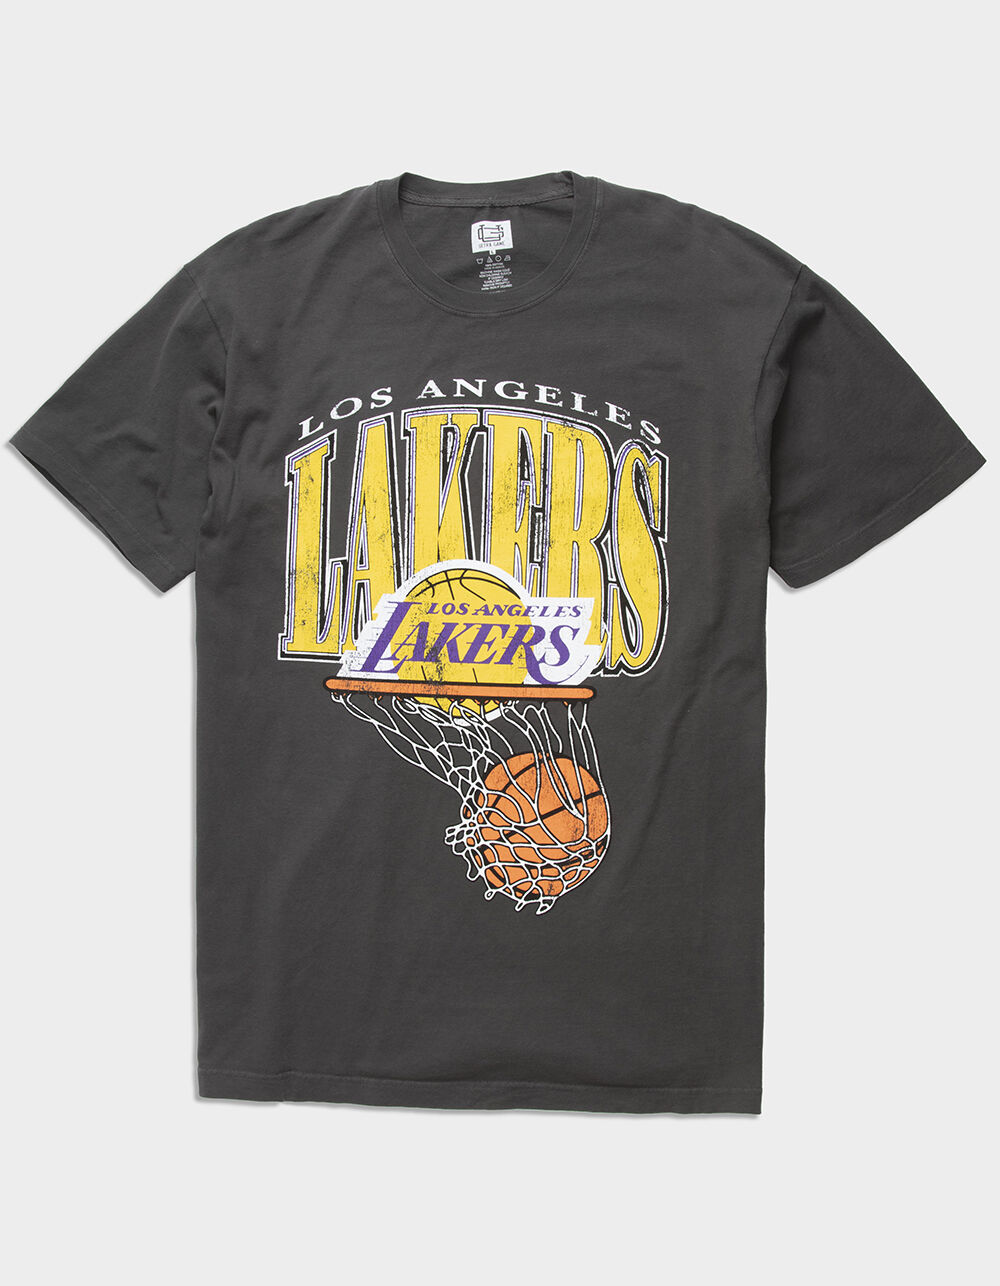 Los Angeles Lakers Lay Up Sweatpants - White Marle - Throwback